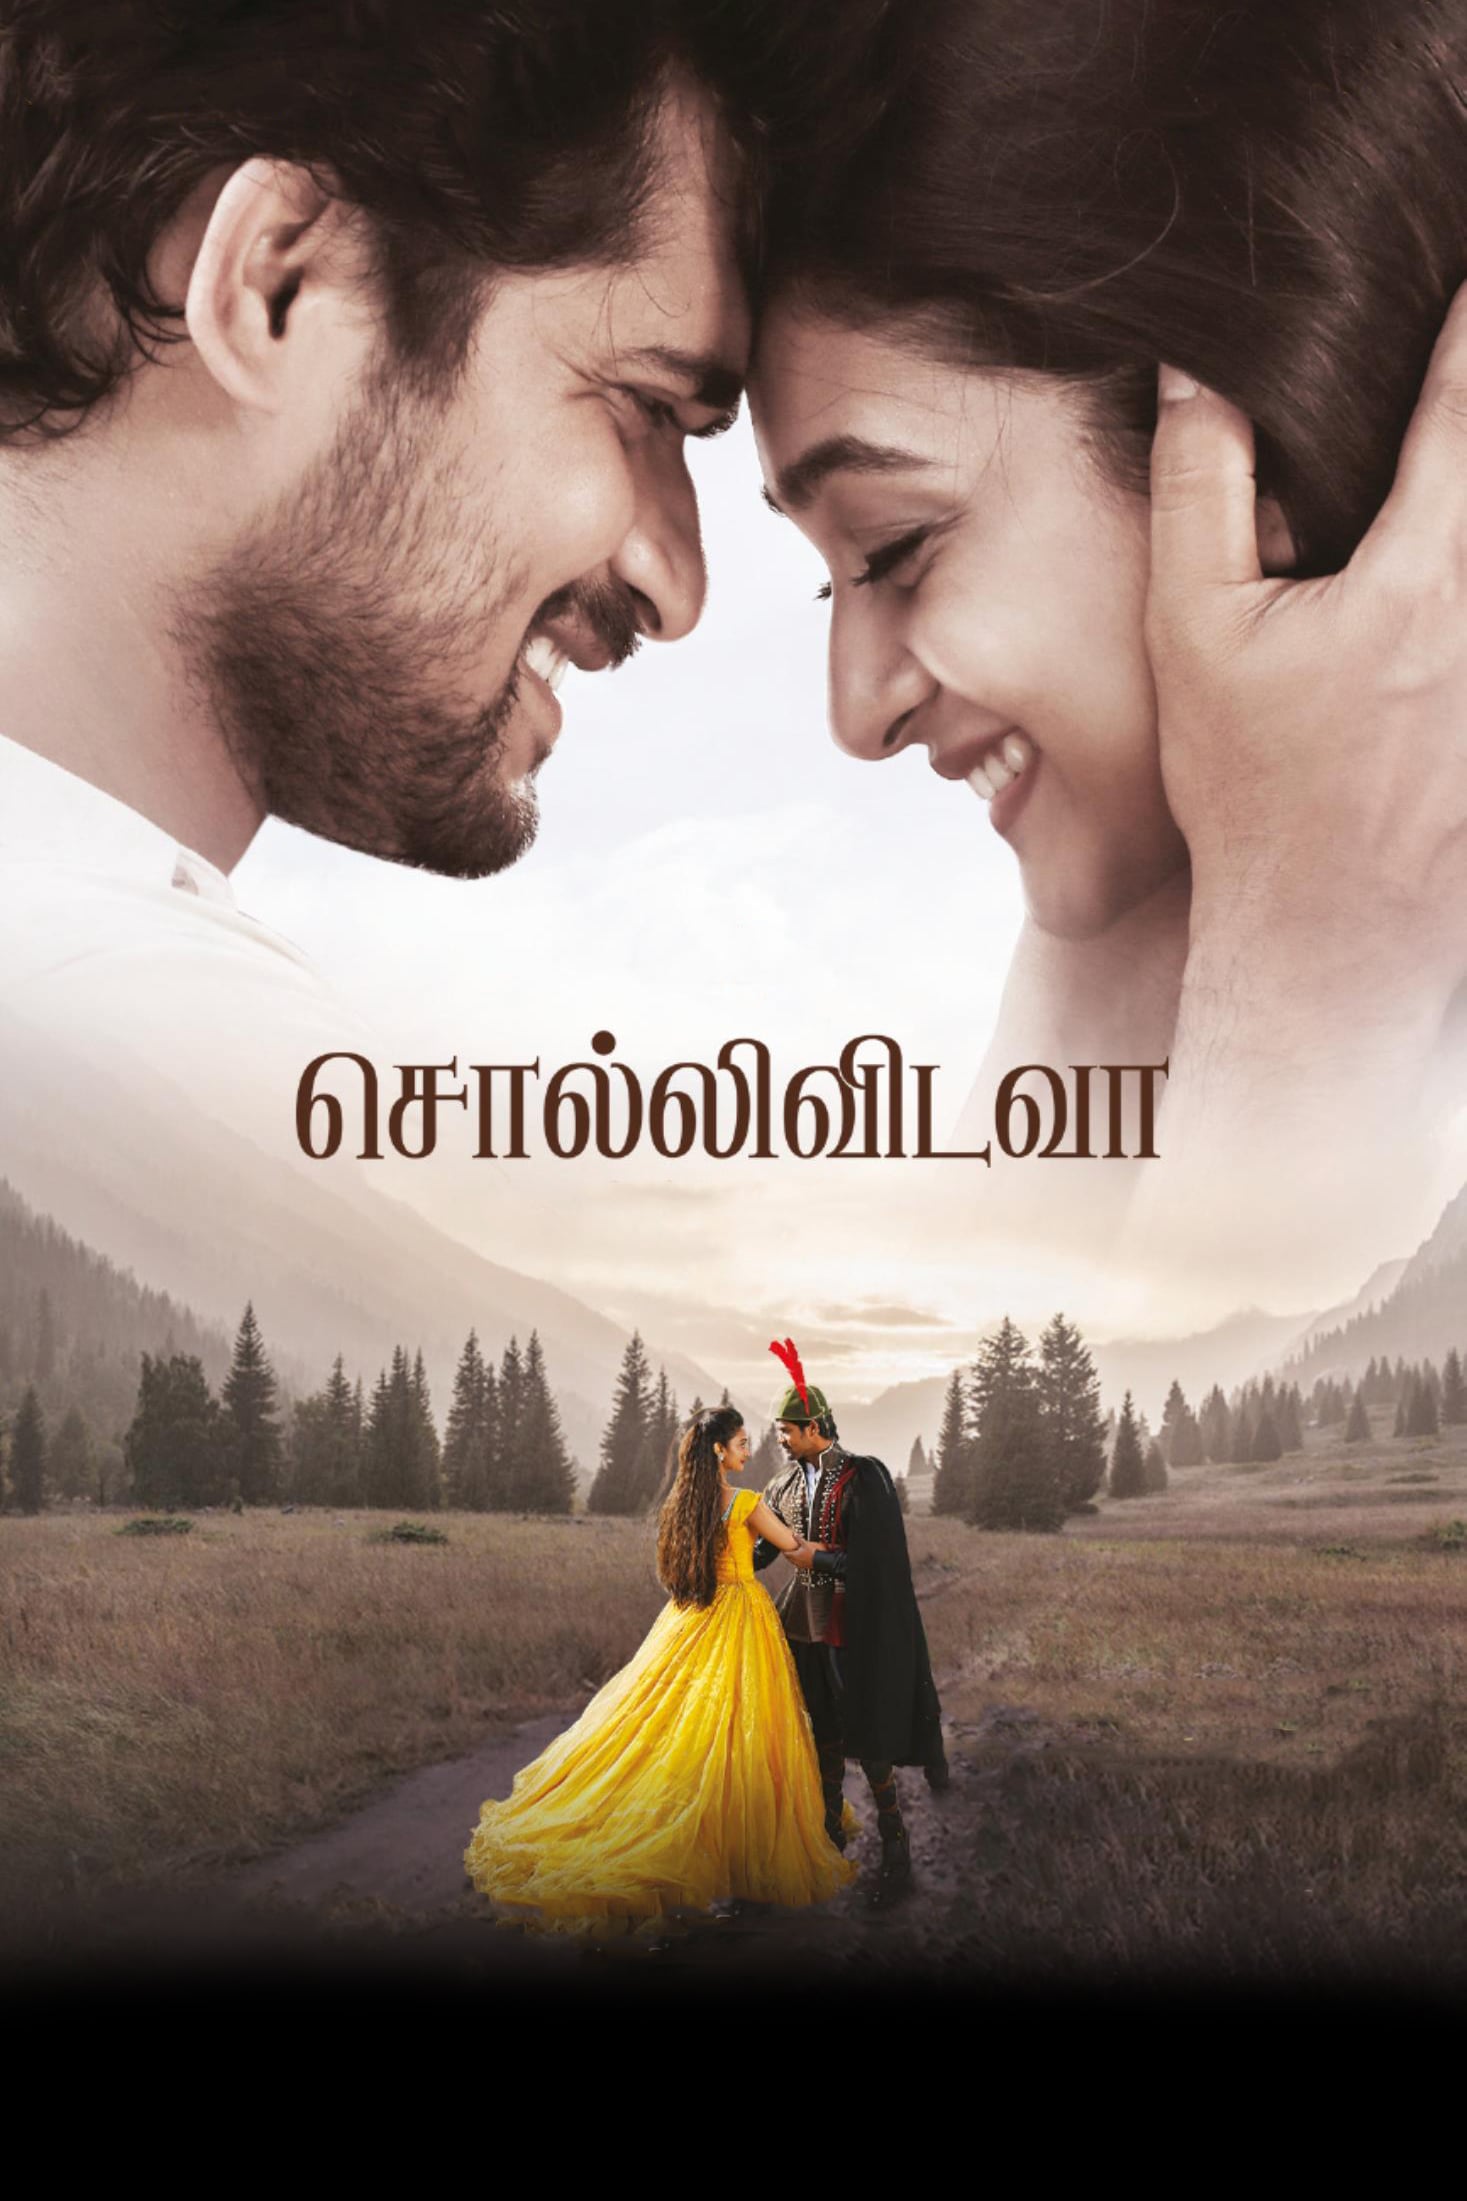 Poster for the movie "Sollividava"